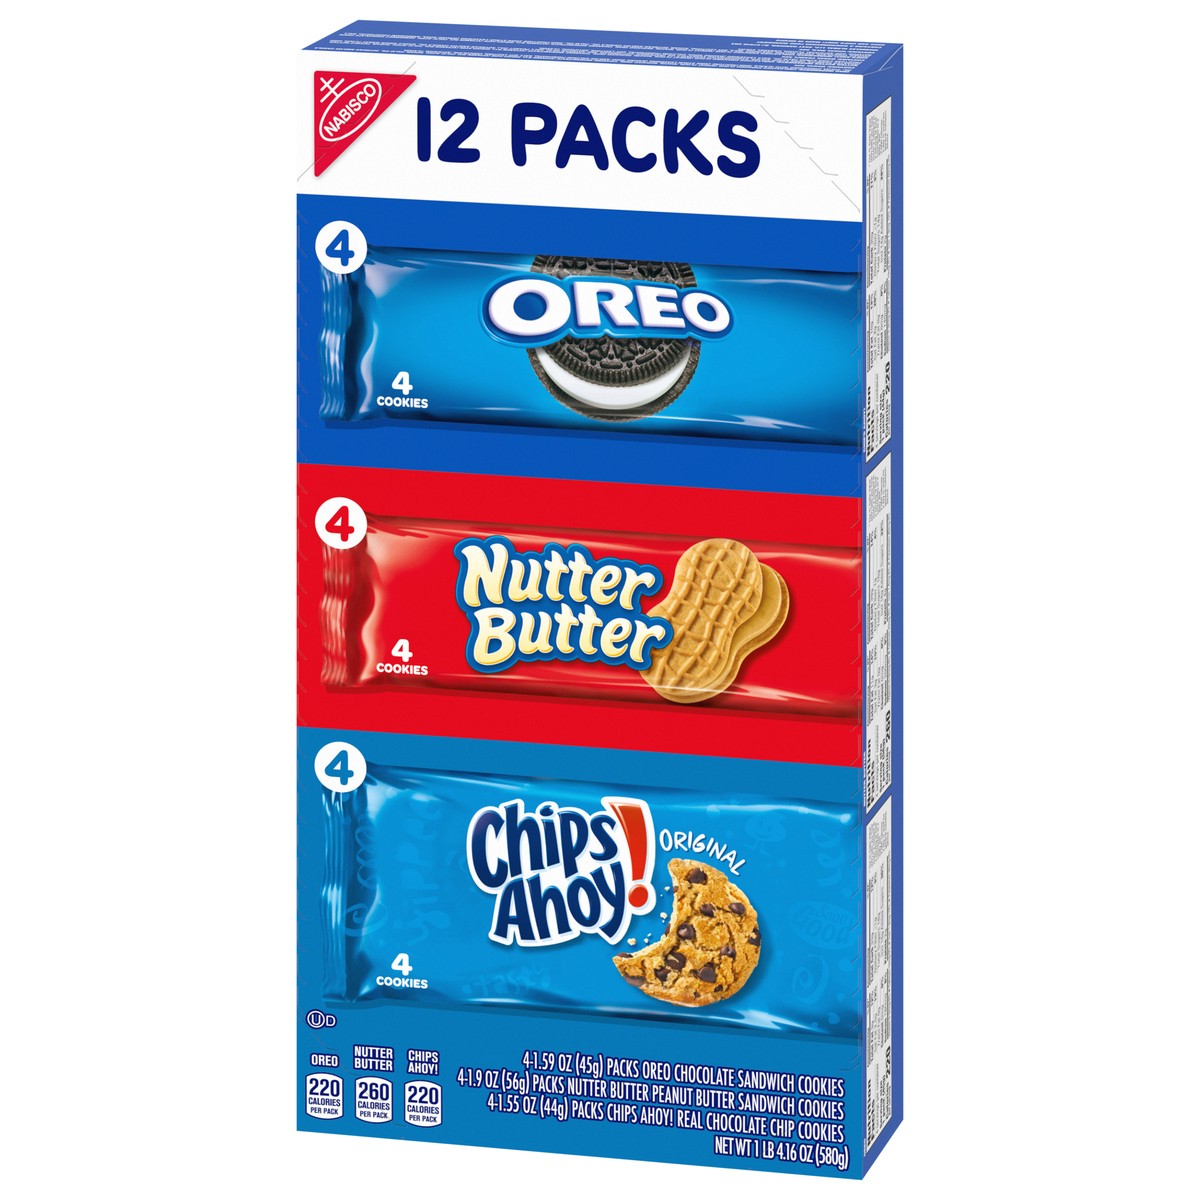 slide 3 of 9, Chips Ahoy!/Nutter Butter/Oreo Nabisco Cookie Variety Pack, OREO, Nutter Butter, CHIPS AHOY!, 12 Snack Packs (4 Cookies Per Pack), 20.16 oz